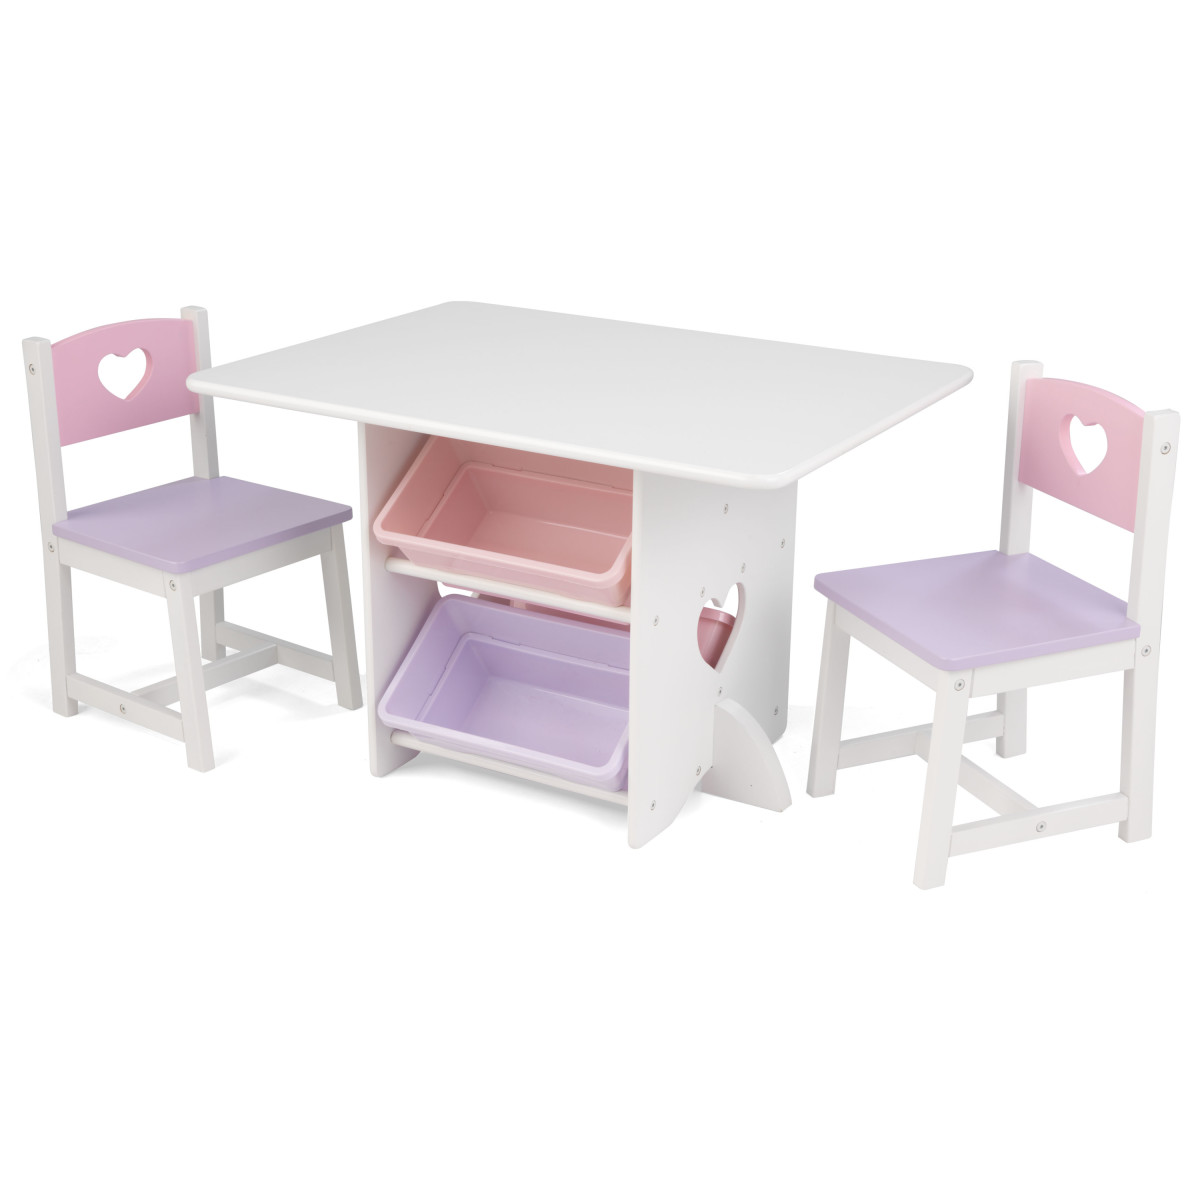 Kidkraft Heart Table Chair Set With Pastel Bins 26913